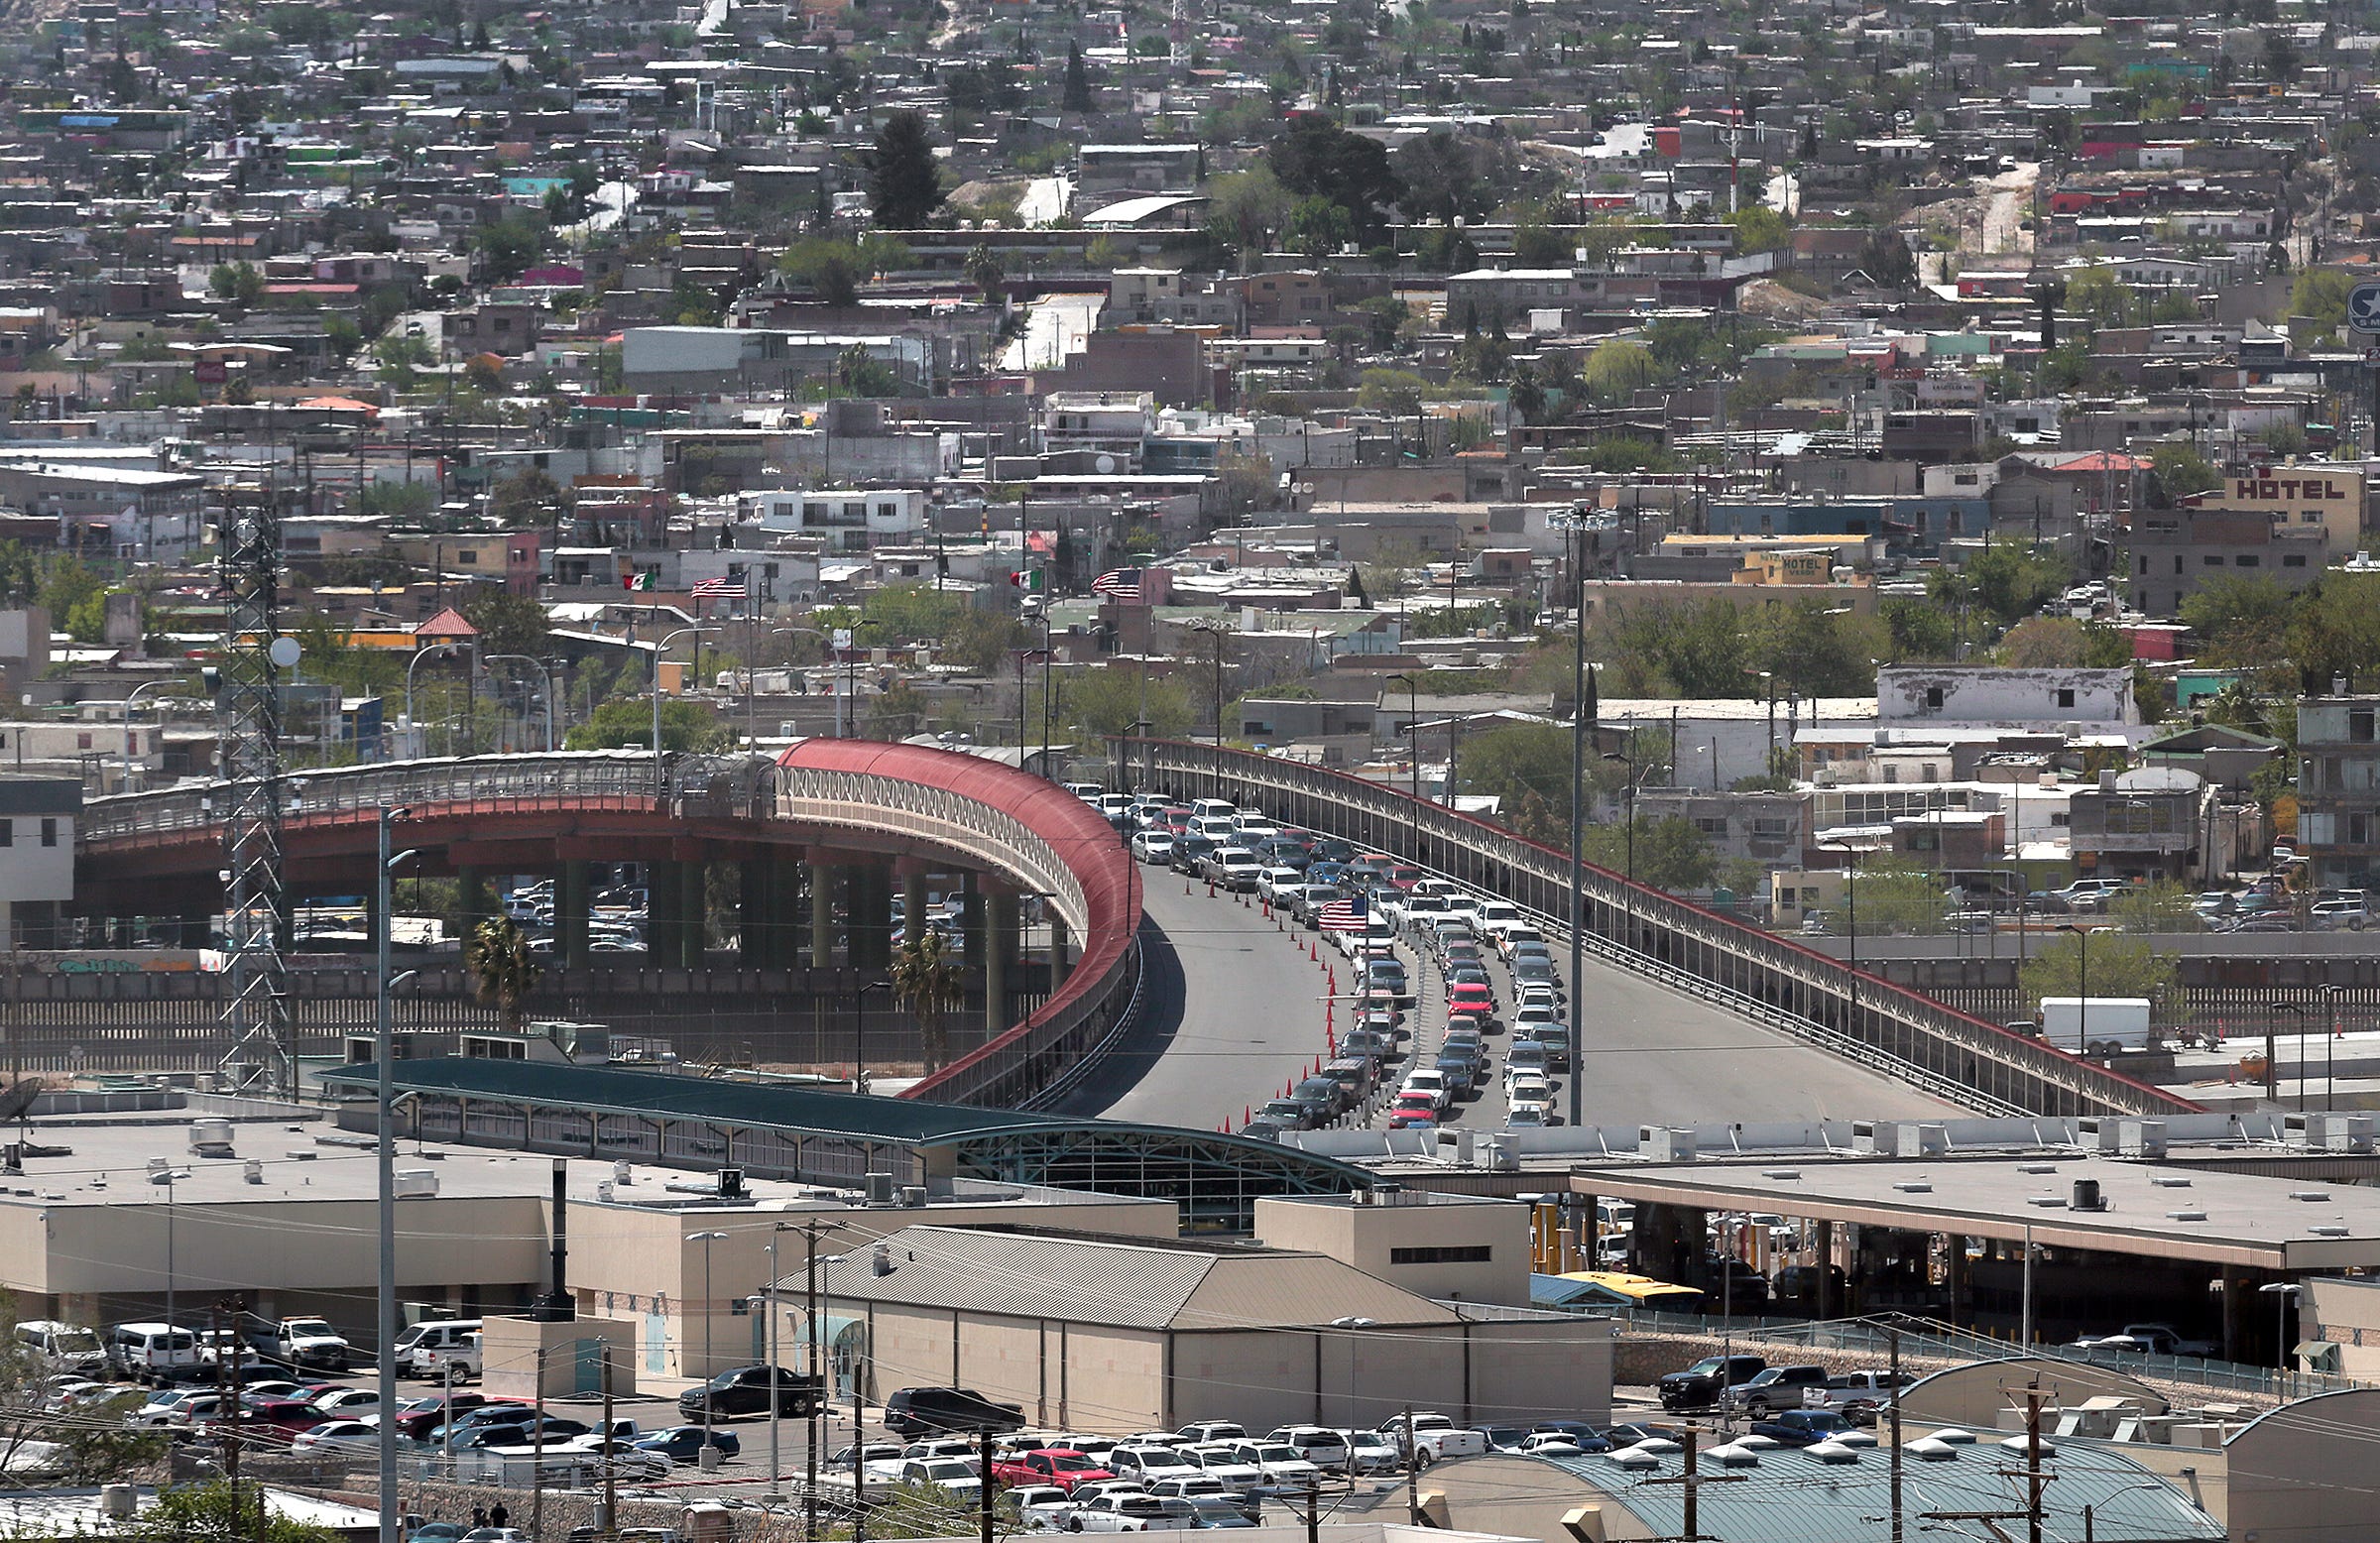 CBP to close cargo lanes at El Paso international bridge as it shifts officers to aid migrant processing